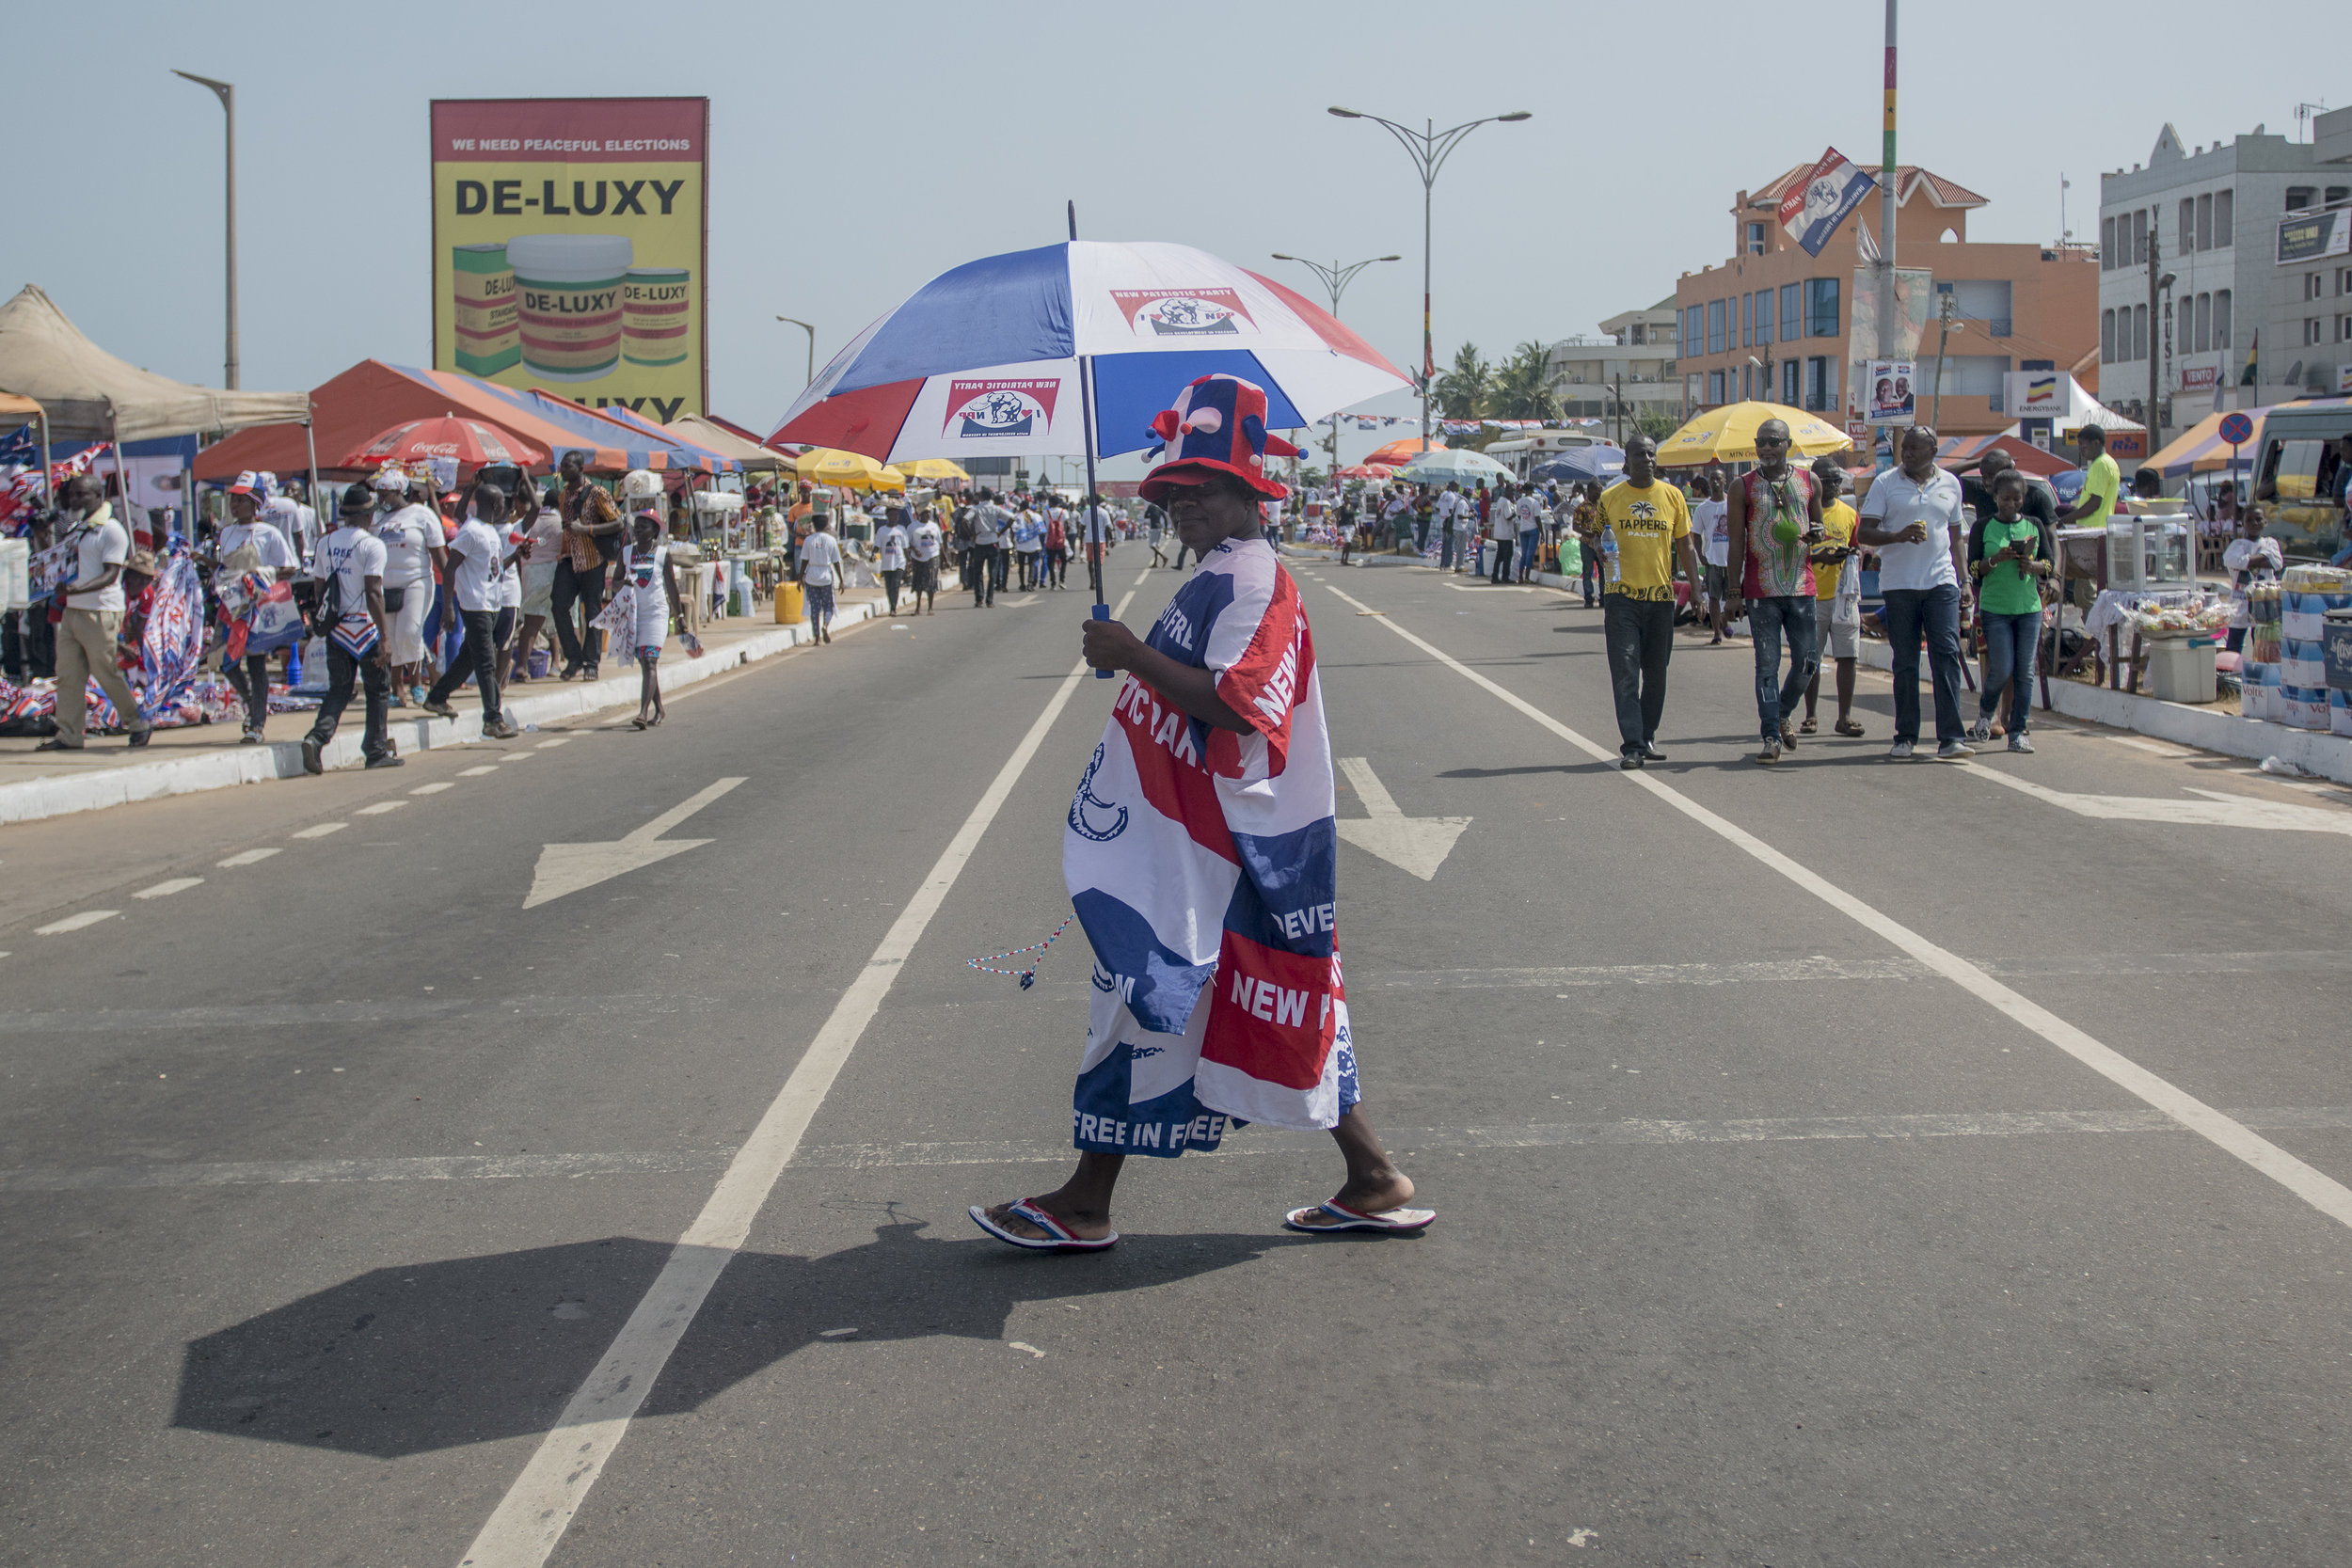  NPP (New Patriotic Party) supporter heading to the last NPP political rally, Grand Finale, in Accra ahead the December 7th General Election 